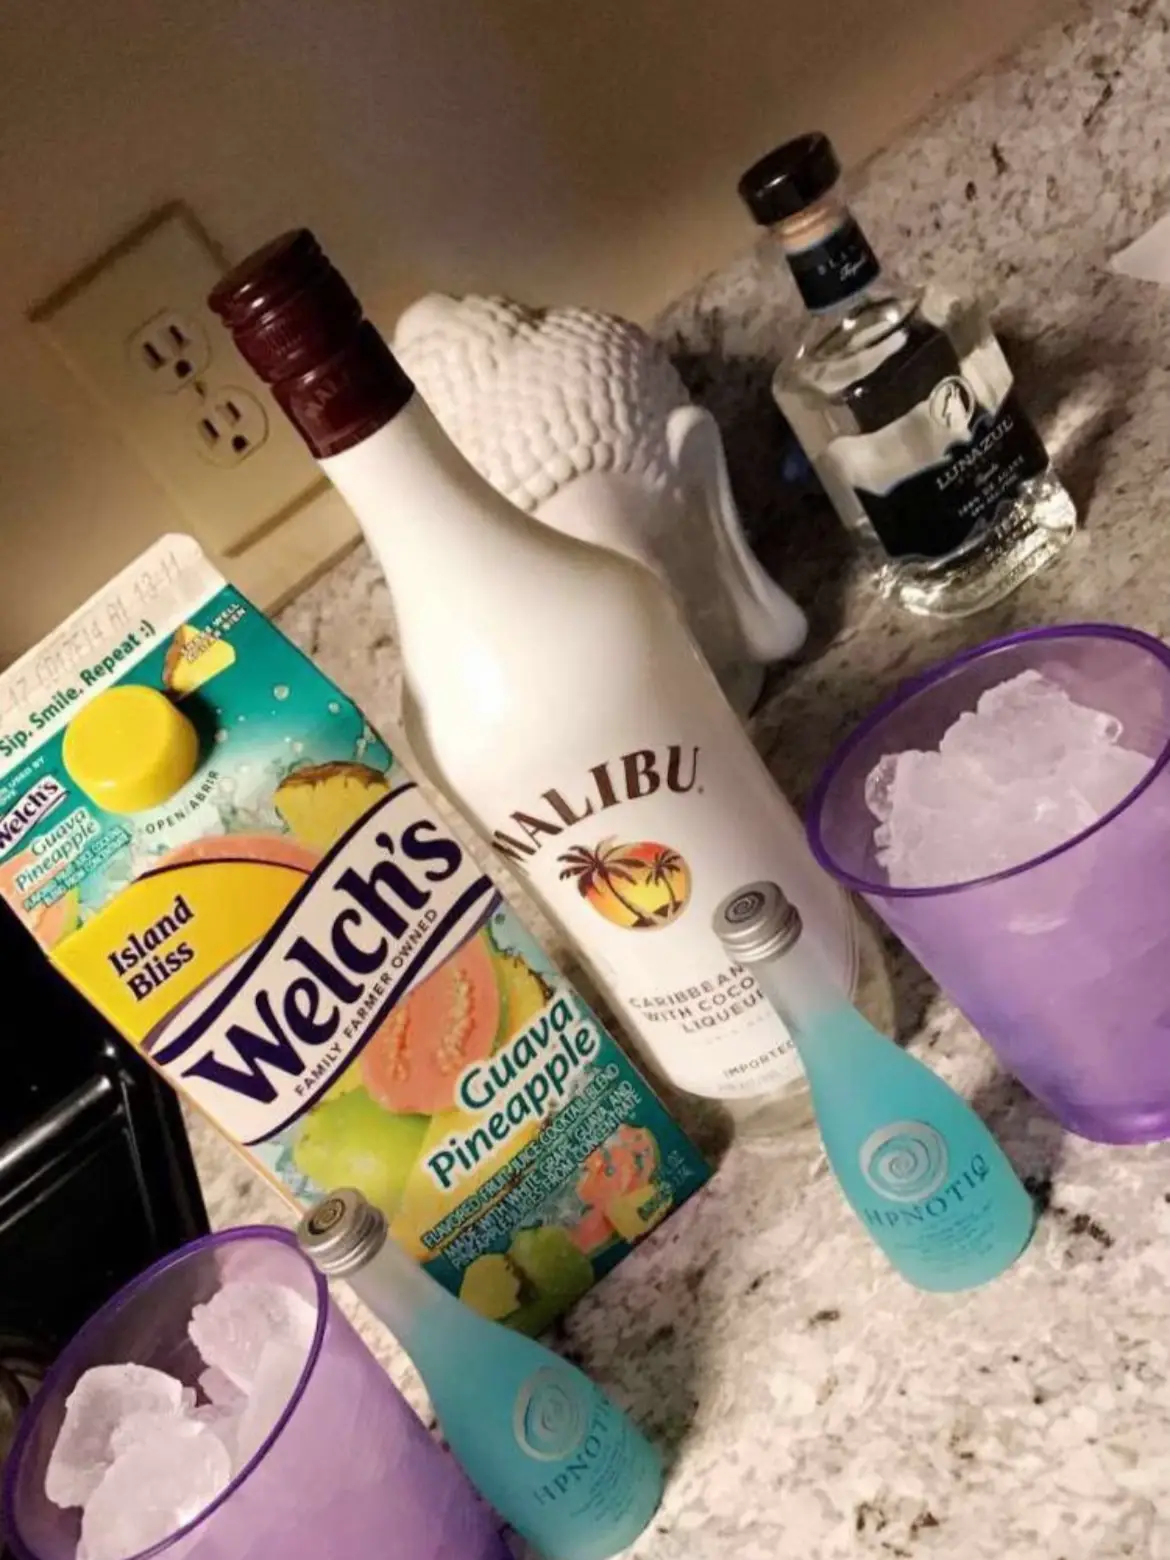  A bottle of Alibi is on a counter next to a cup of juice and a bottle of Welch's Bliss Island.